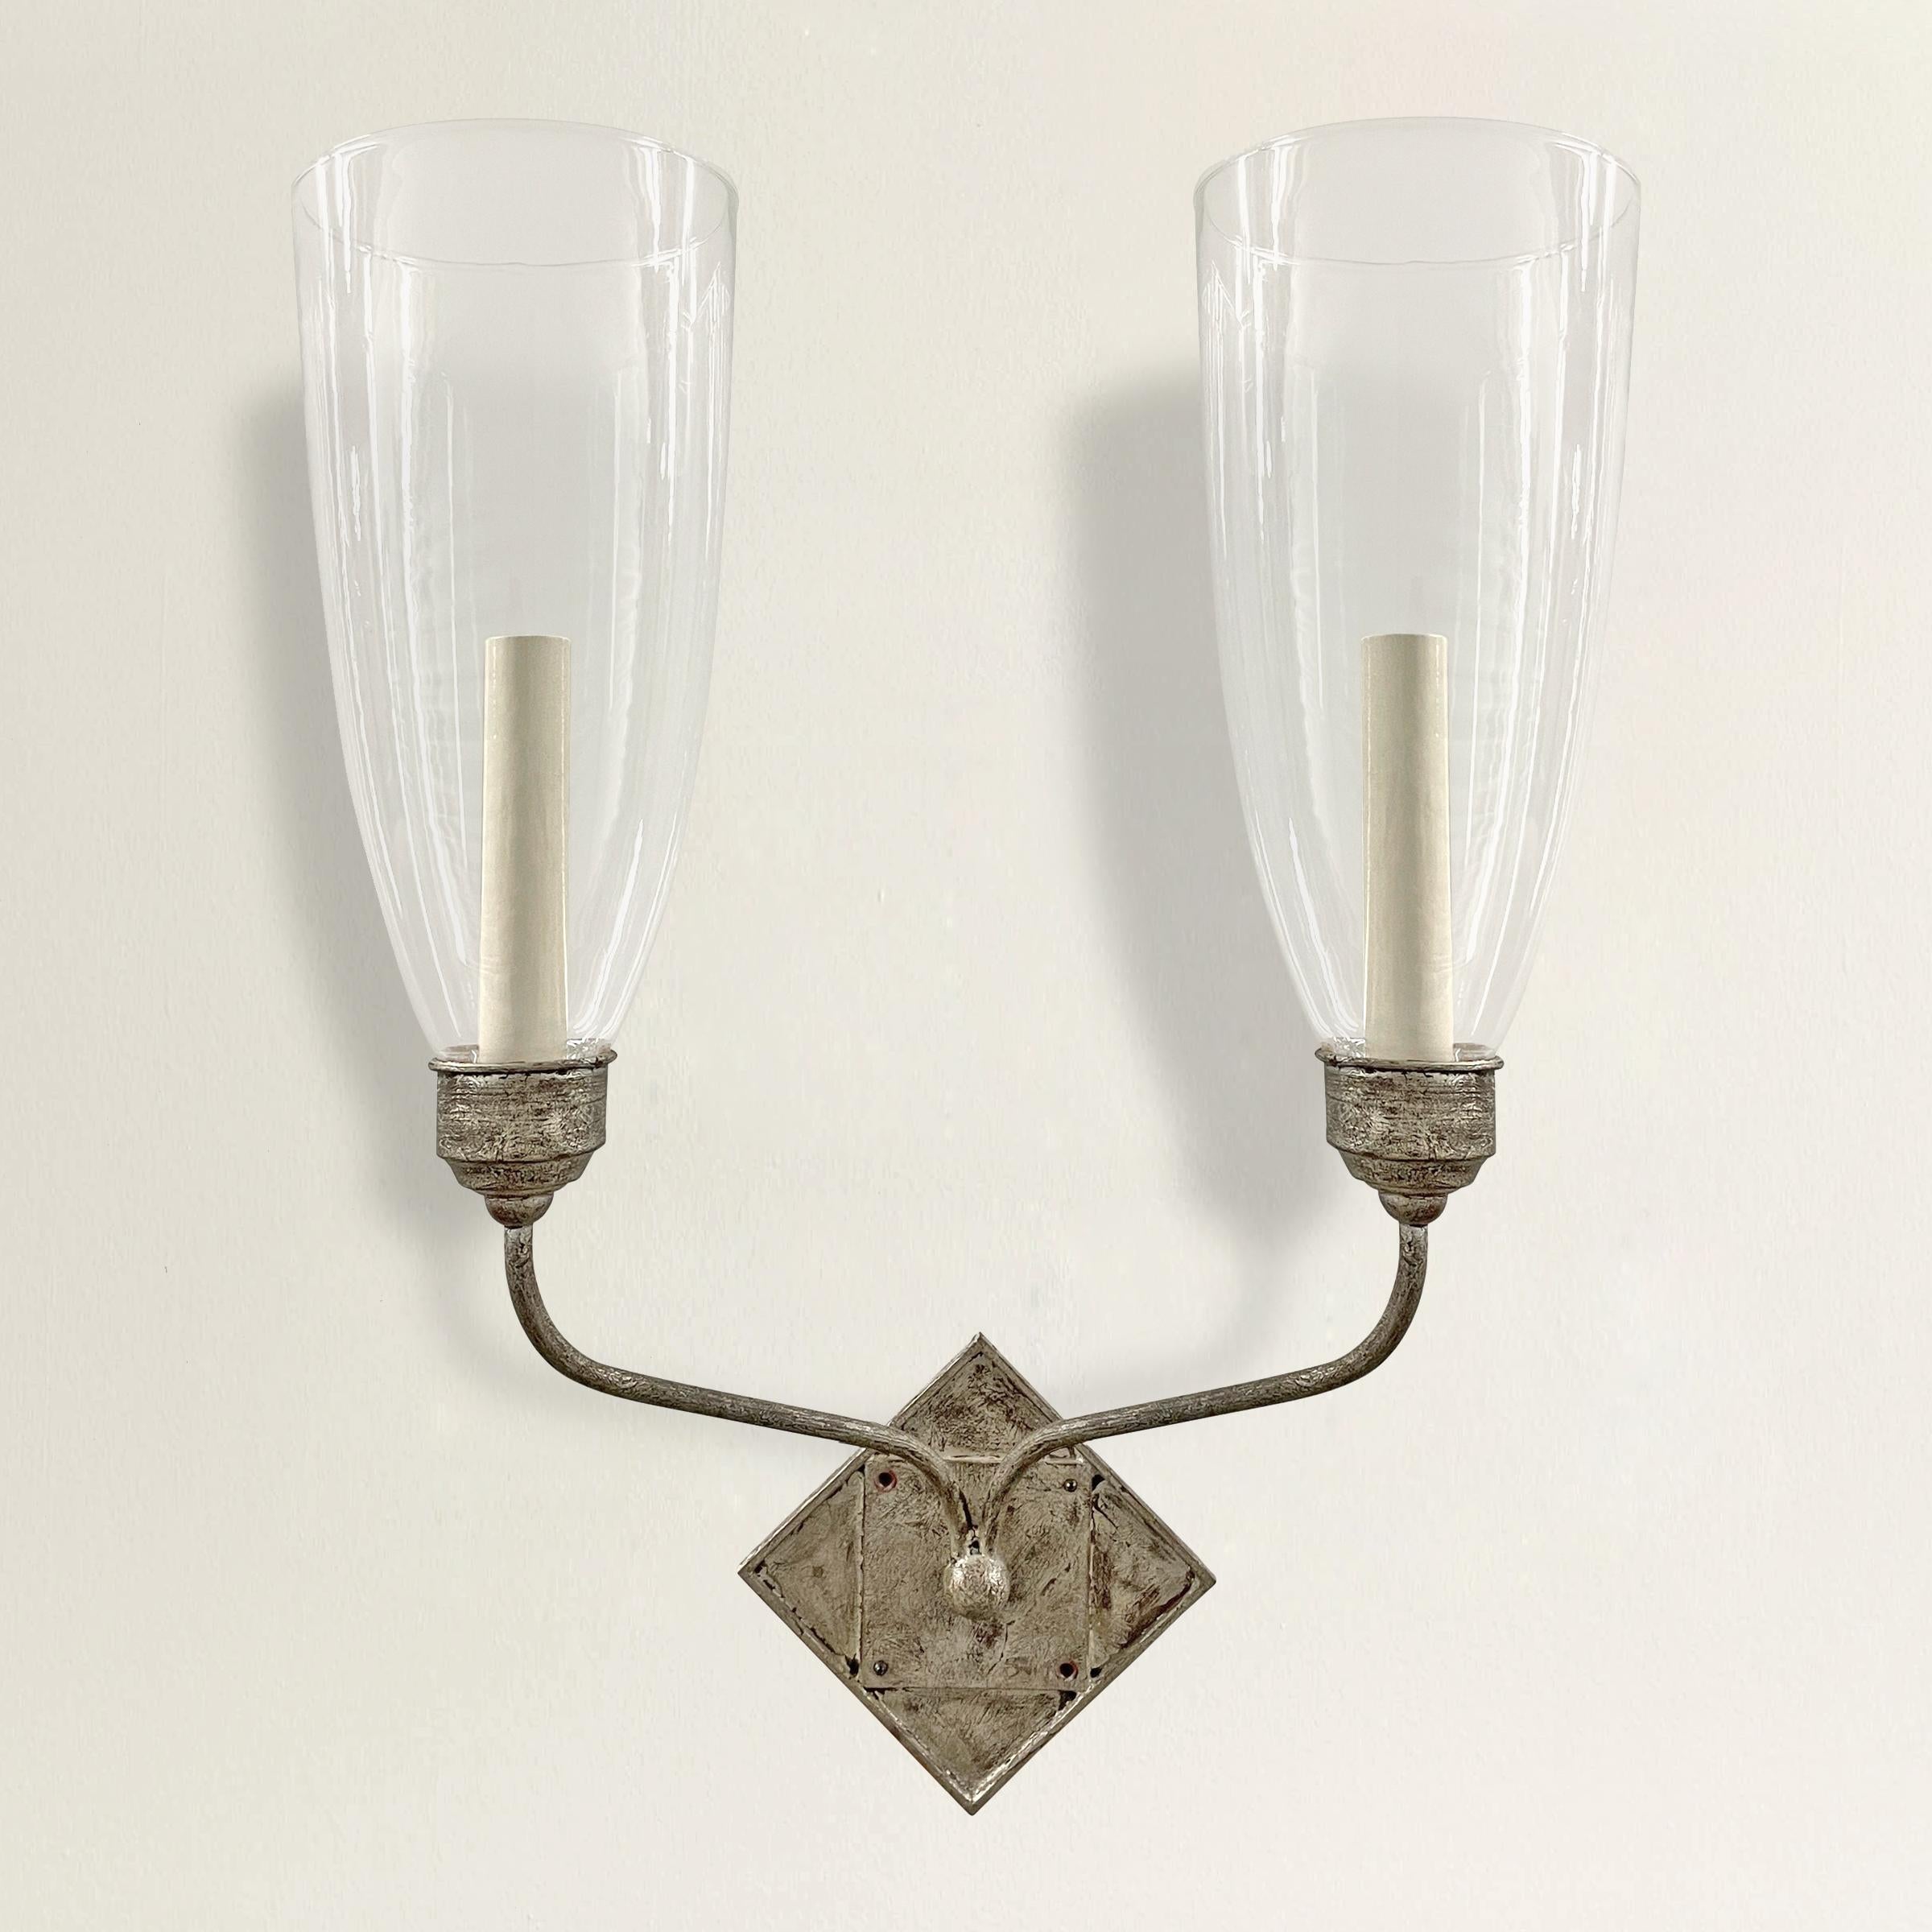 American Pair of Two-Arm Sconces with Hurricane Shades